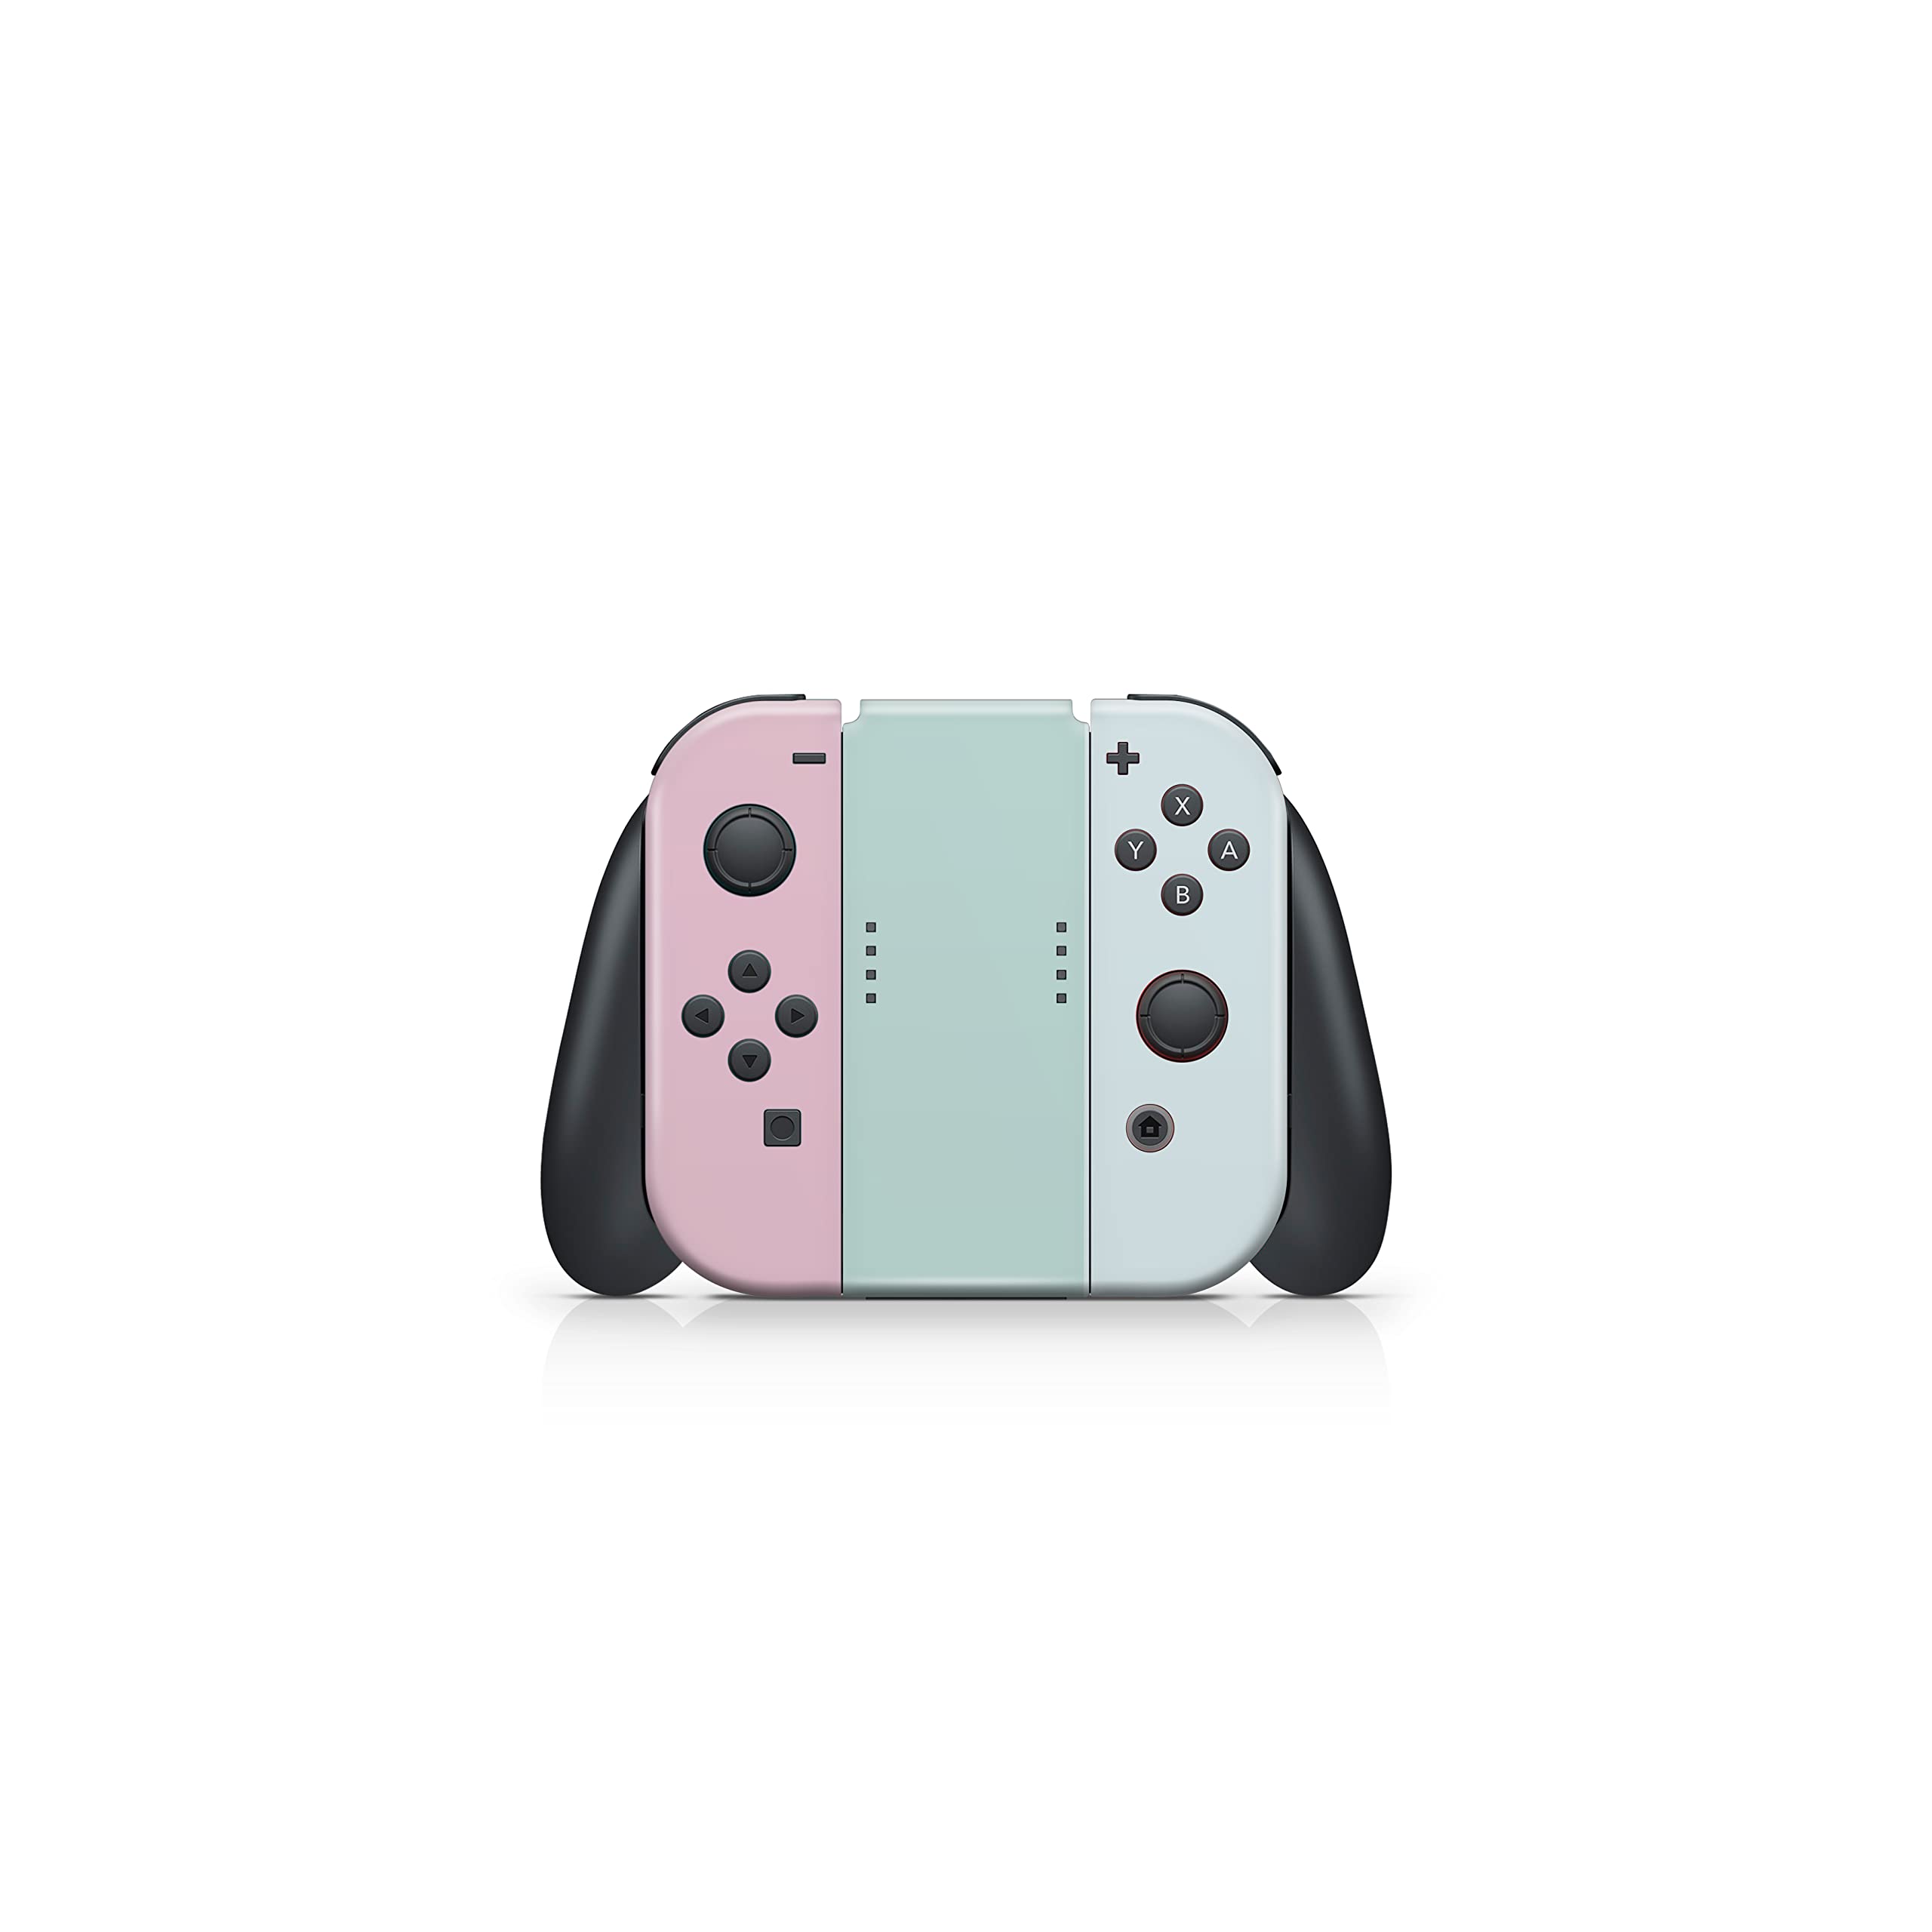 Tacky Design Colorwave Skin Compatible with Nintendo Switch Skin - Premium Vinyl 3M Blue Pastel Stickers Set - Switch Skin Compatible with Joy Con, Console, Dock, Decal Full Wrap